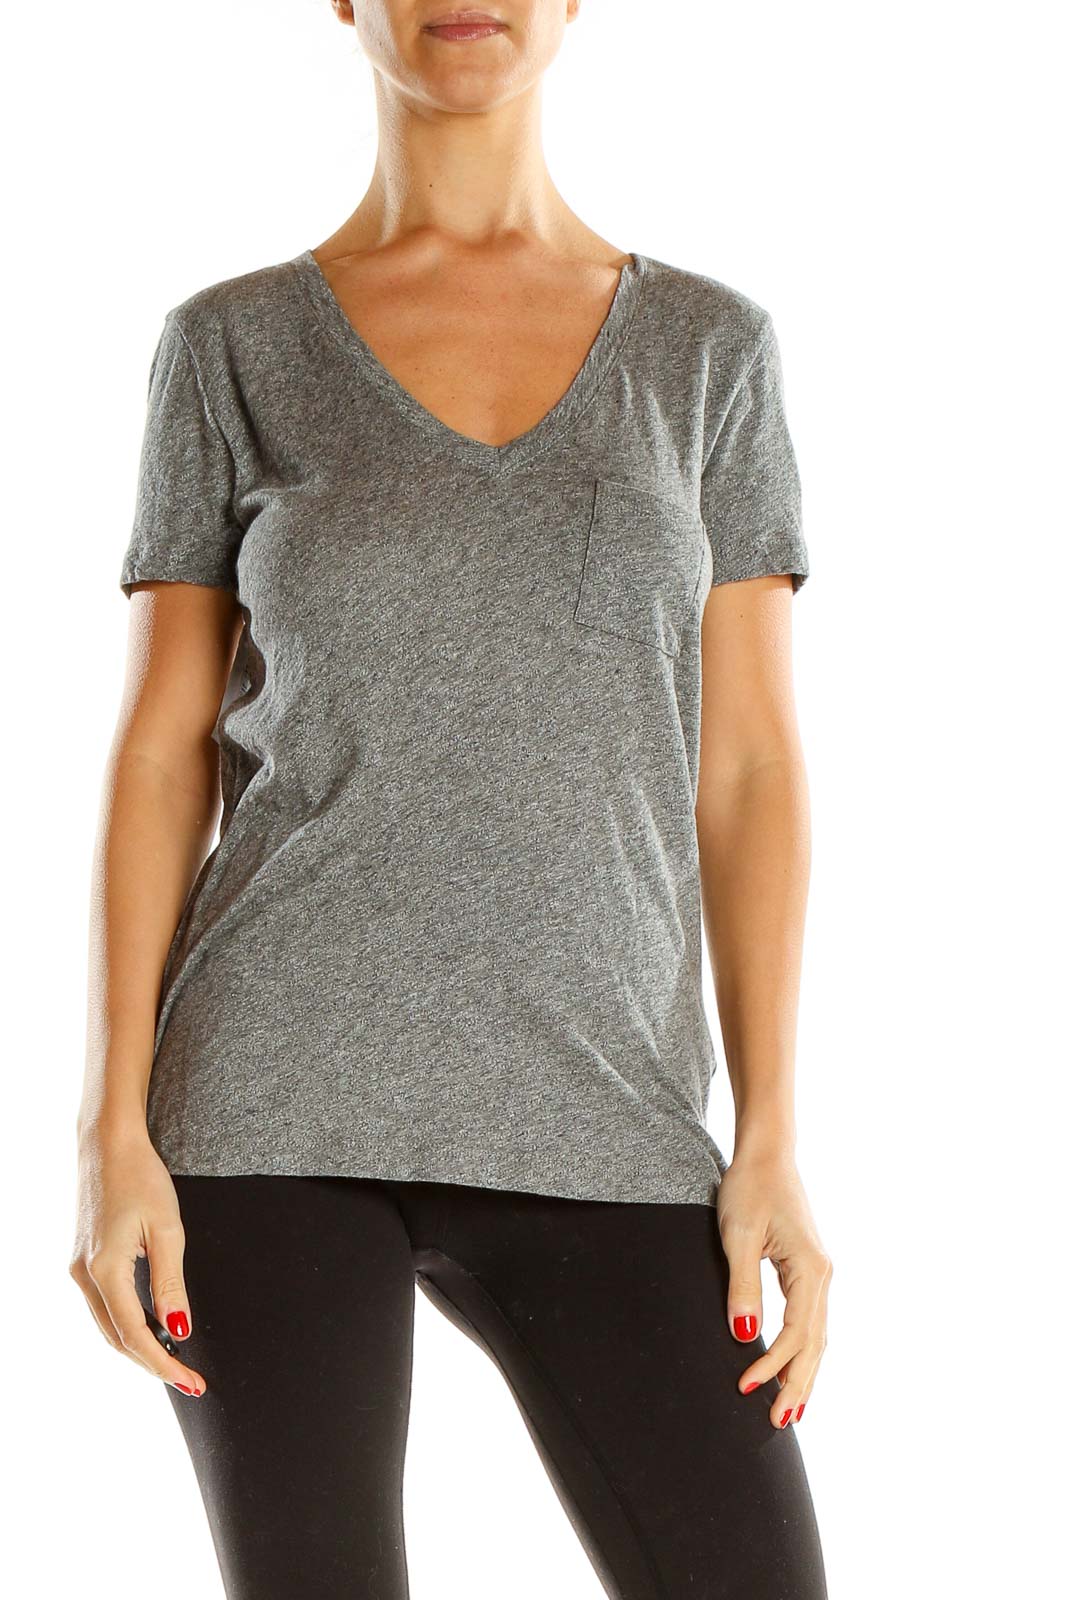 Gray Casual T-Shirt Front